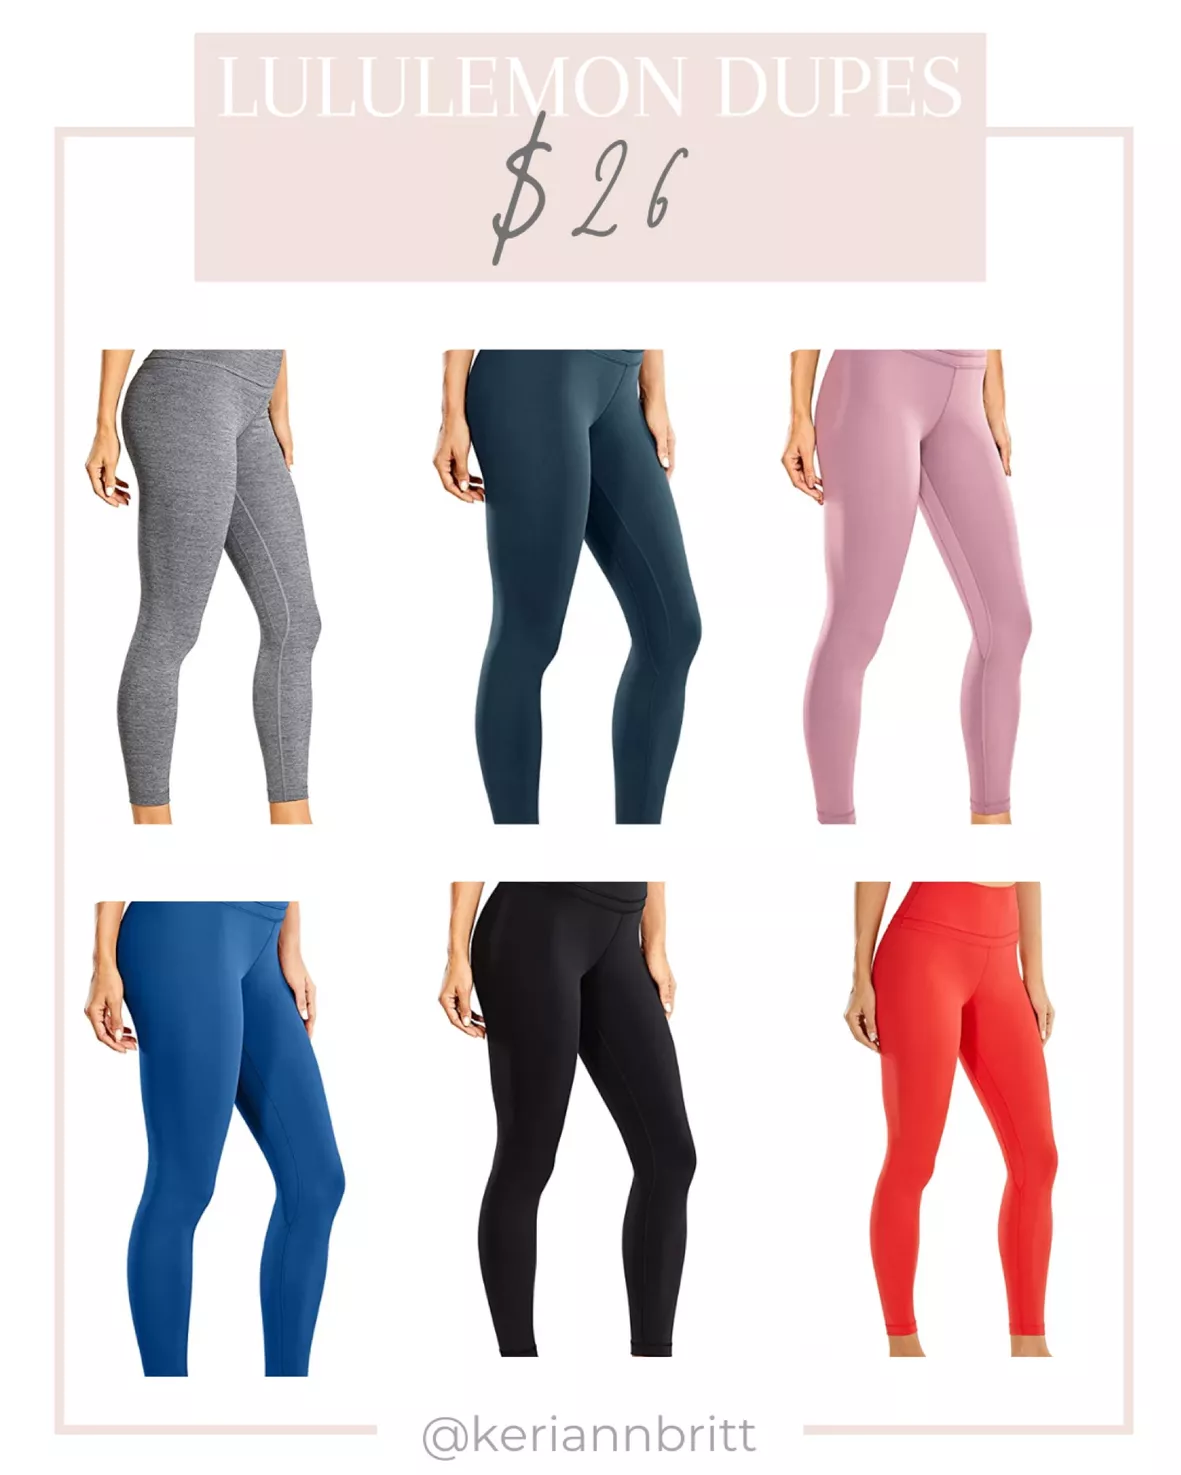 CRZ YOGA Women's Naked Feeling … curated on LTK